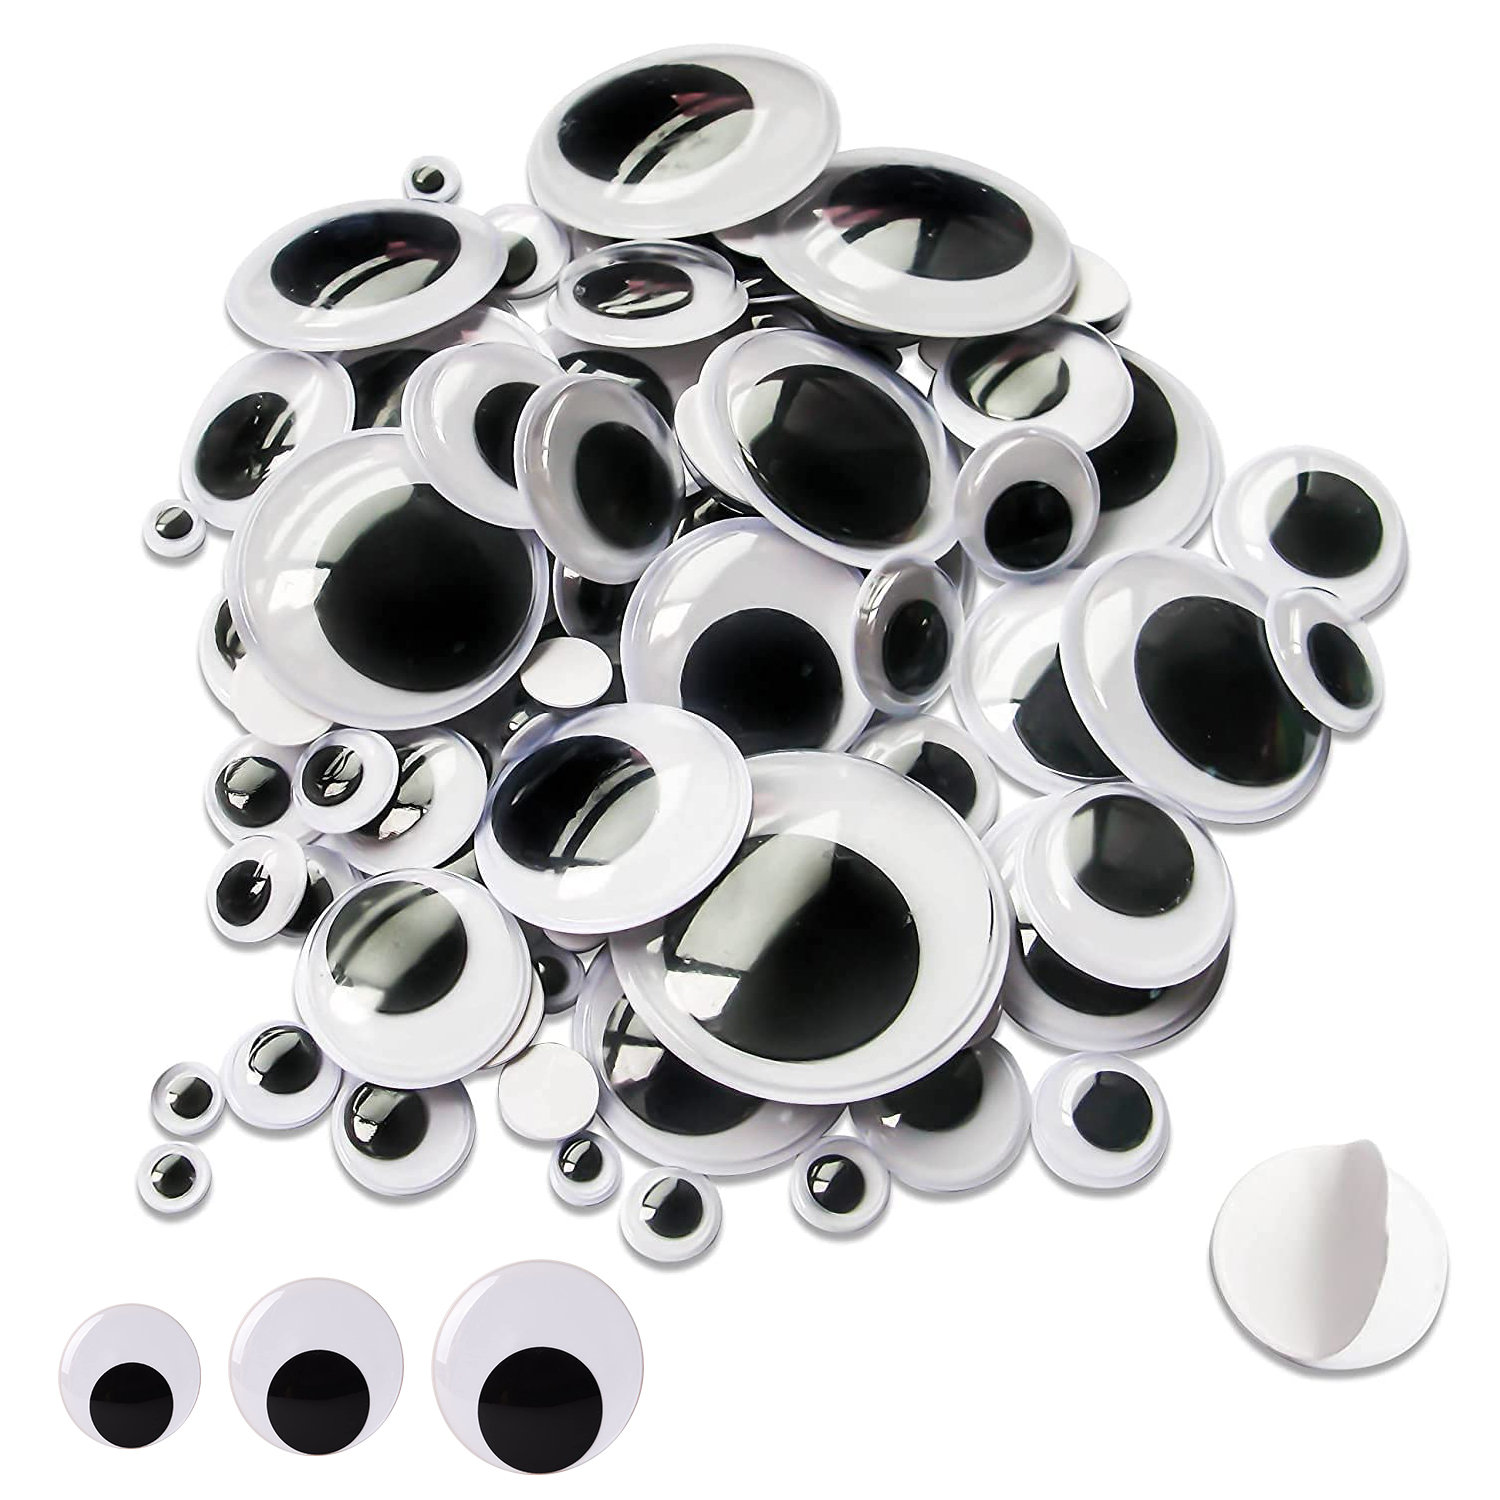 FINGOOO 3 Inch Giant Wiggle Googly Eyes,Large Sticky Eyes for Craft Decorations Set of 12 